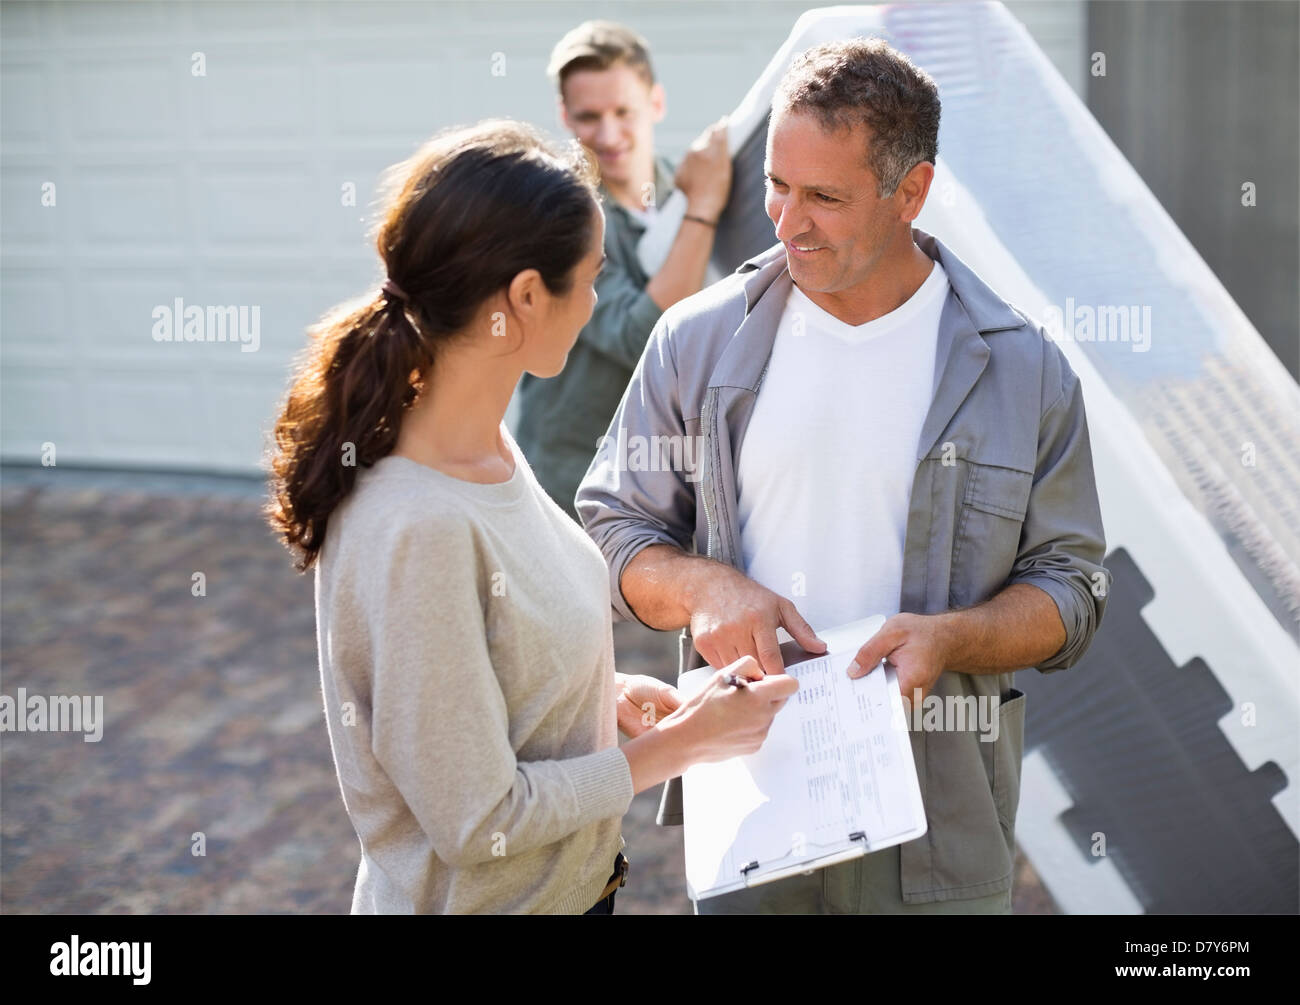 Woman signing for package in driveway Stock Photo